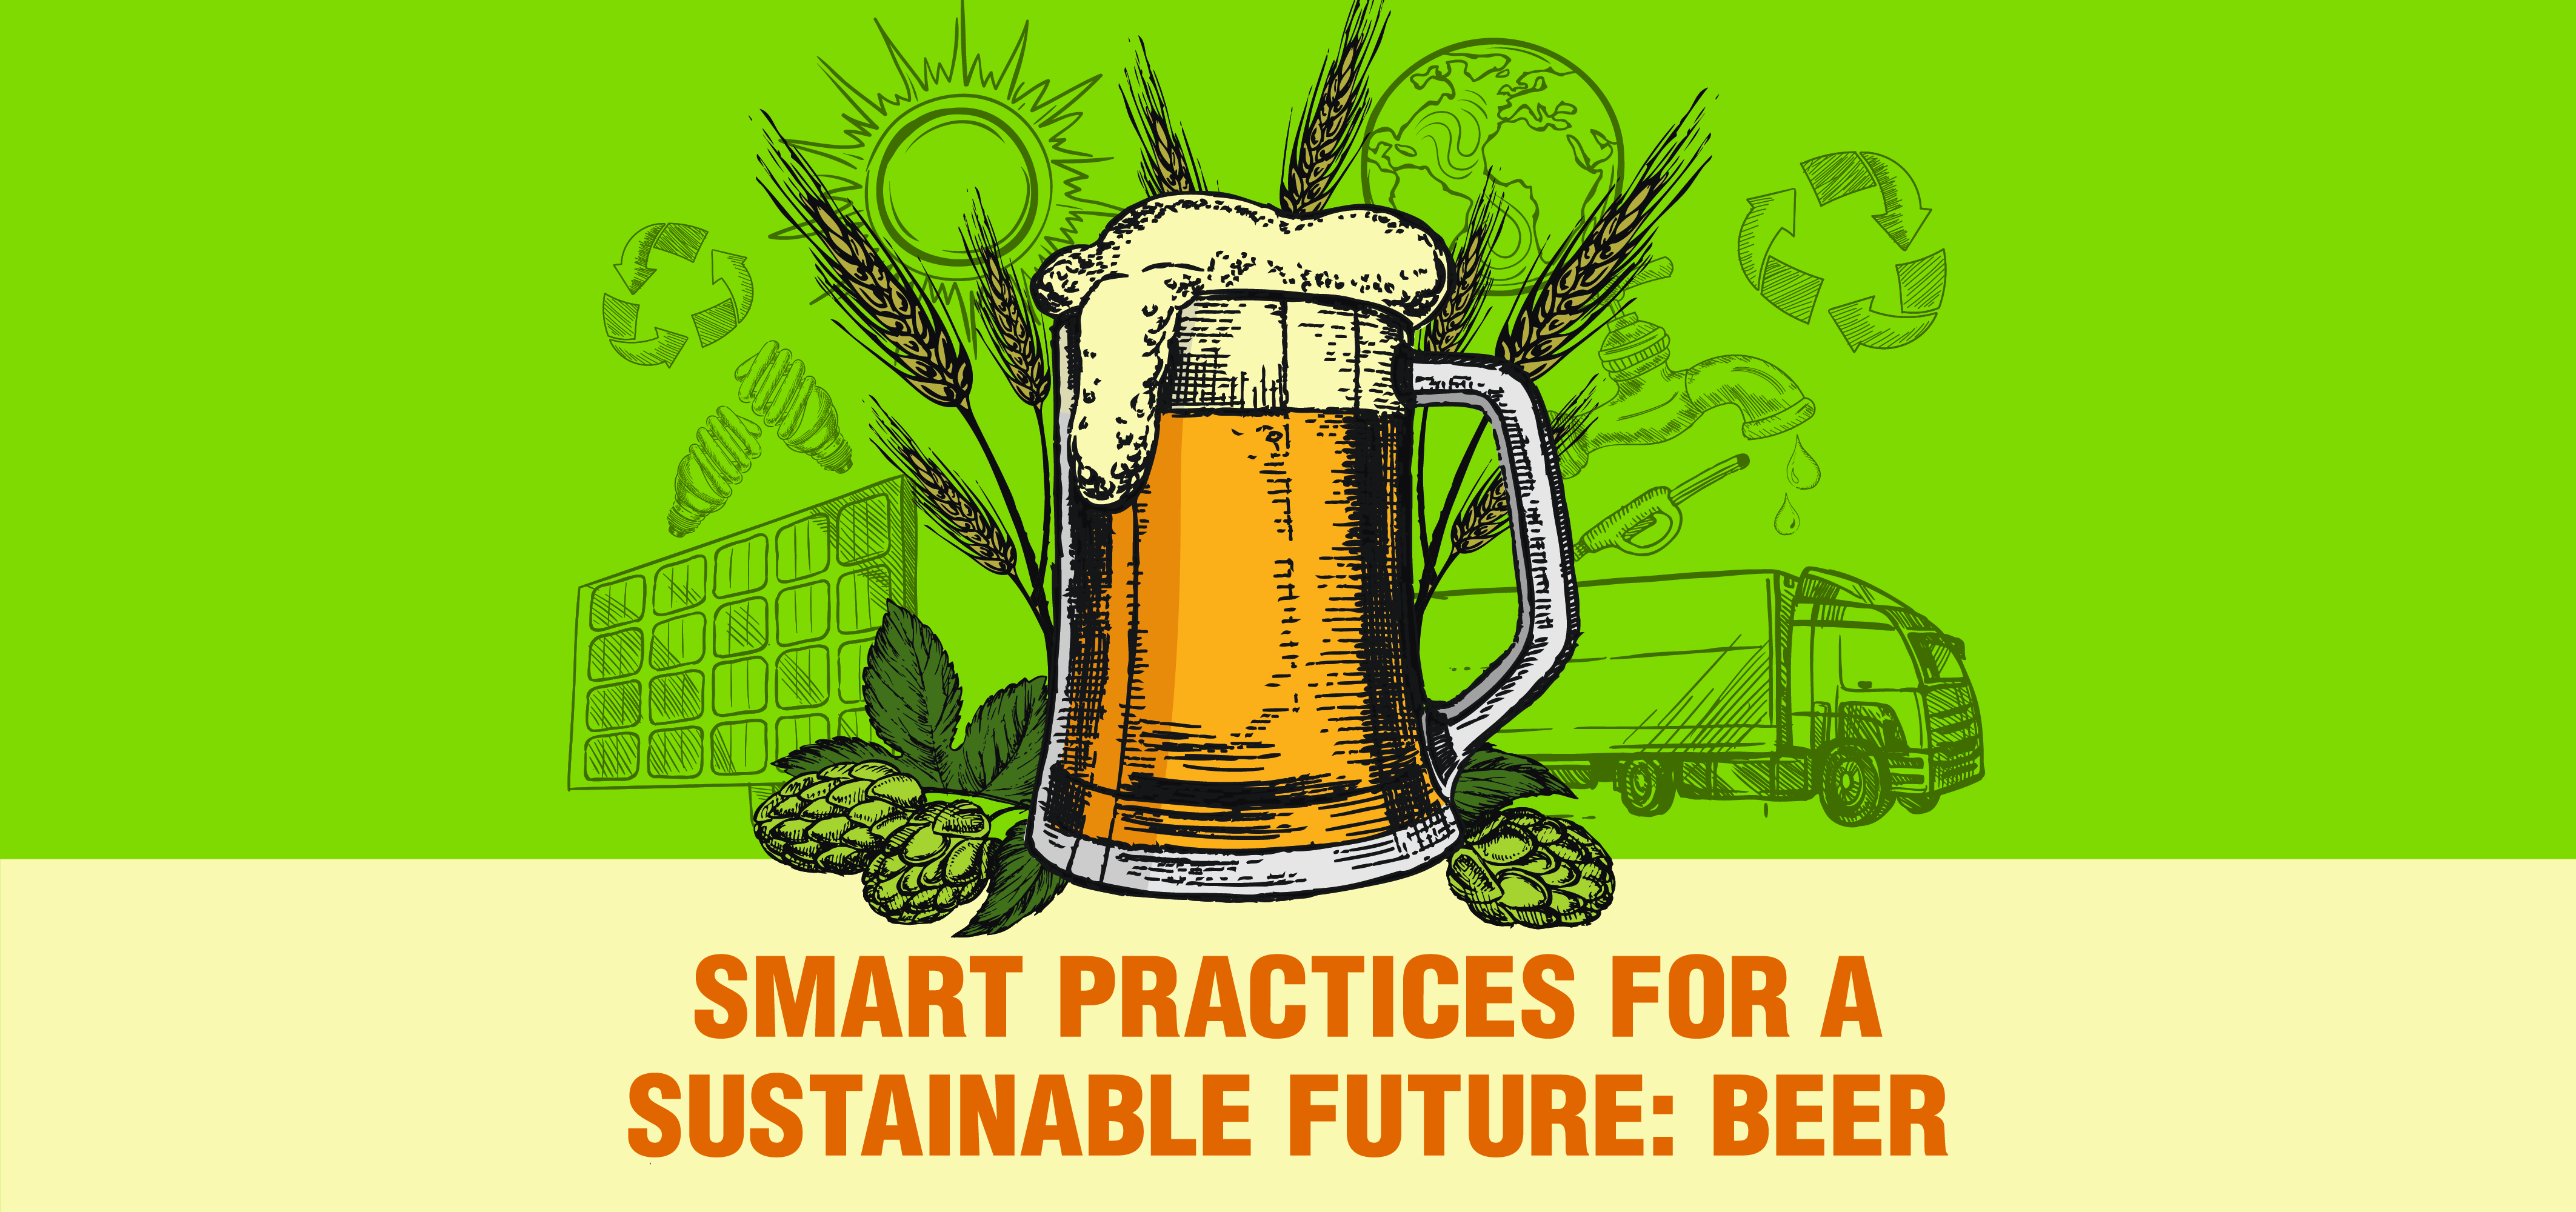 Graphic design of sustainable beer 